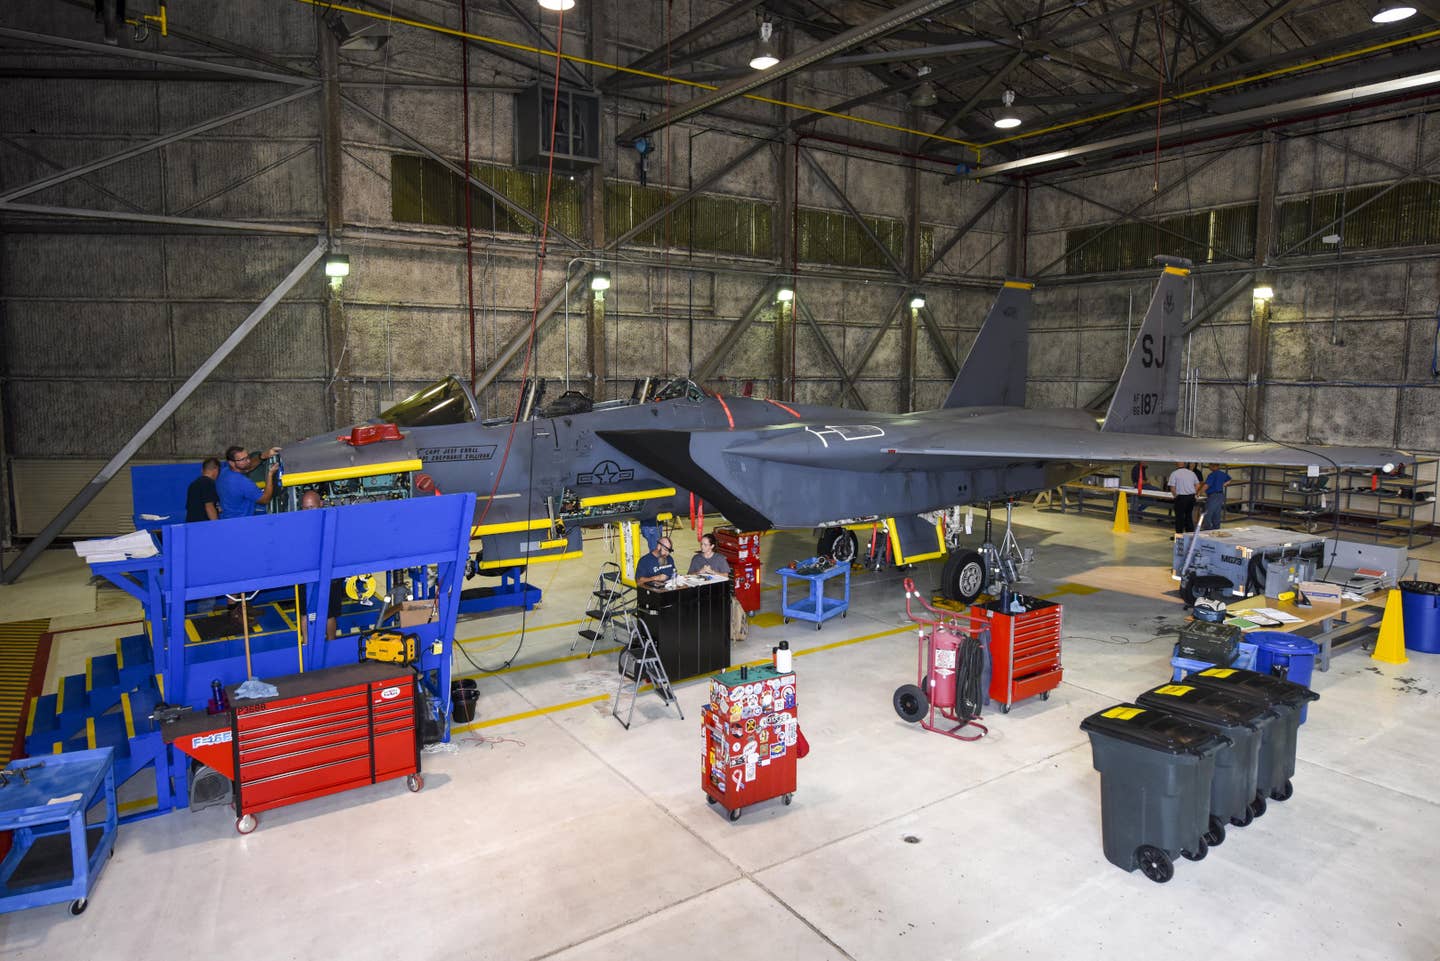 An F-15E Strike Eagle, another aircraft type the Air Force is seeking extra funding for spare parts for, is seen here undergoing work to upgrade its radar. <em>USAF</em>